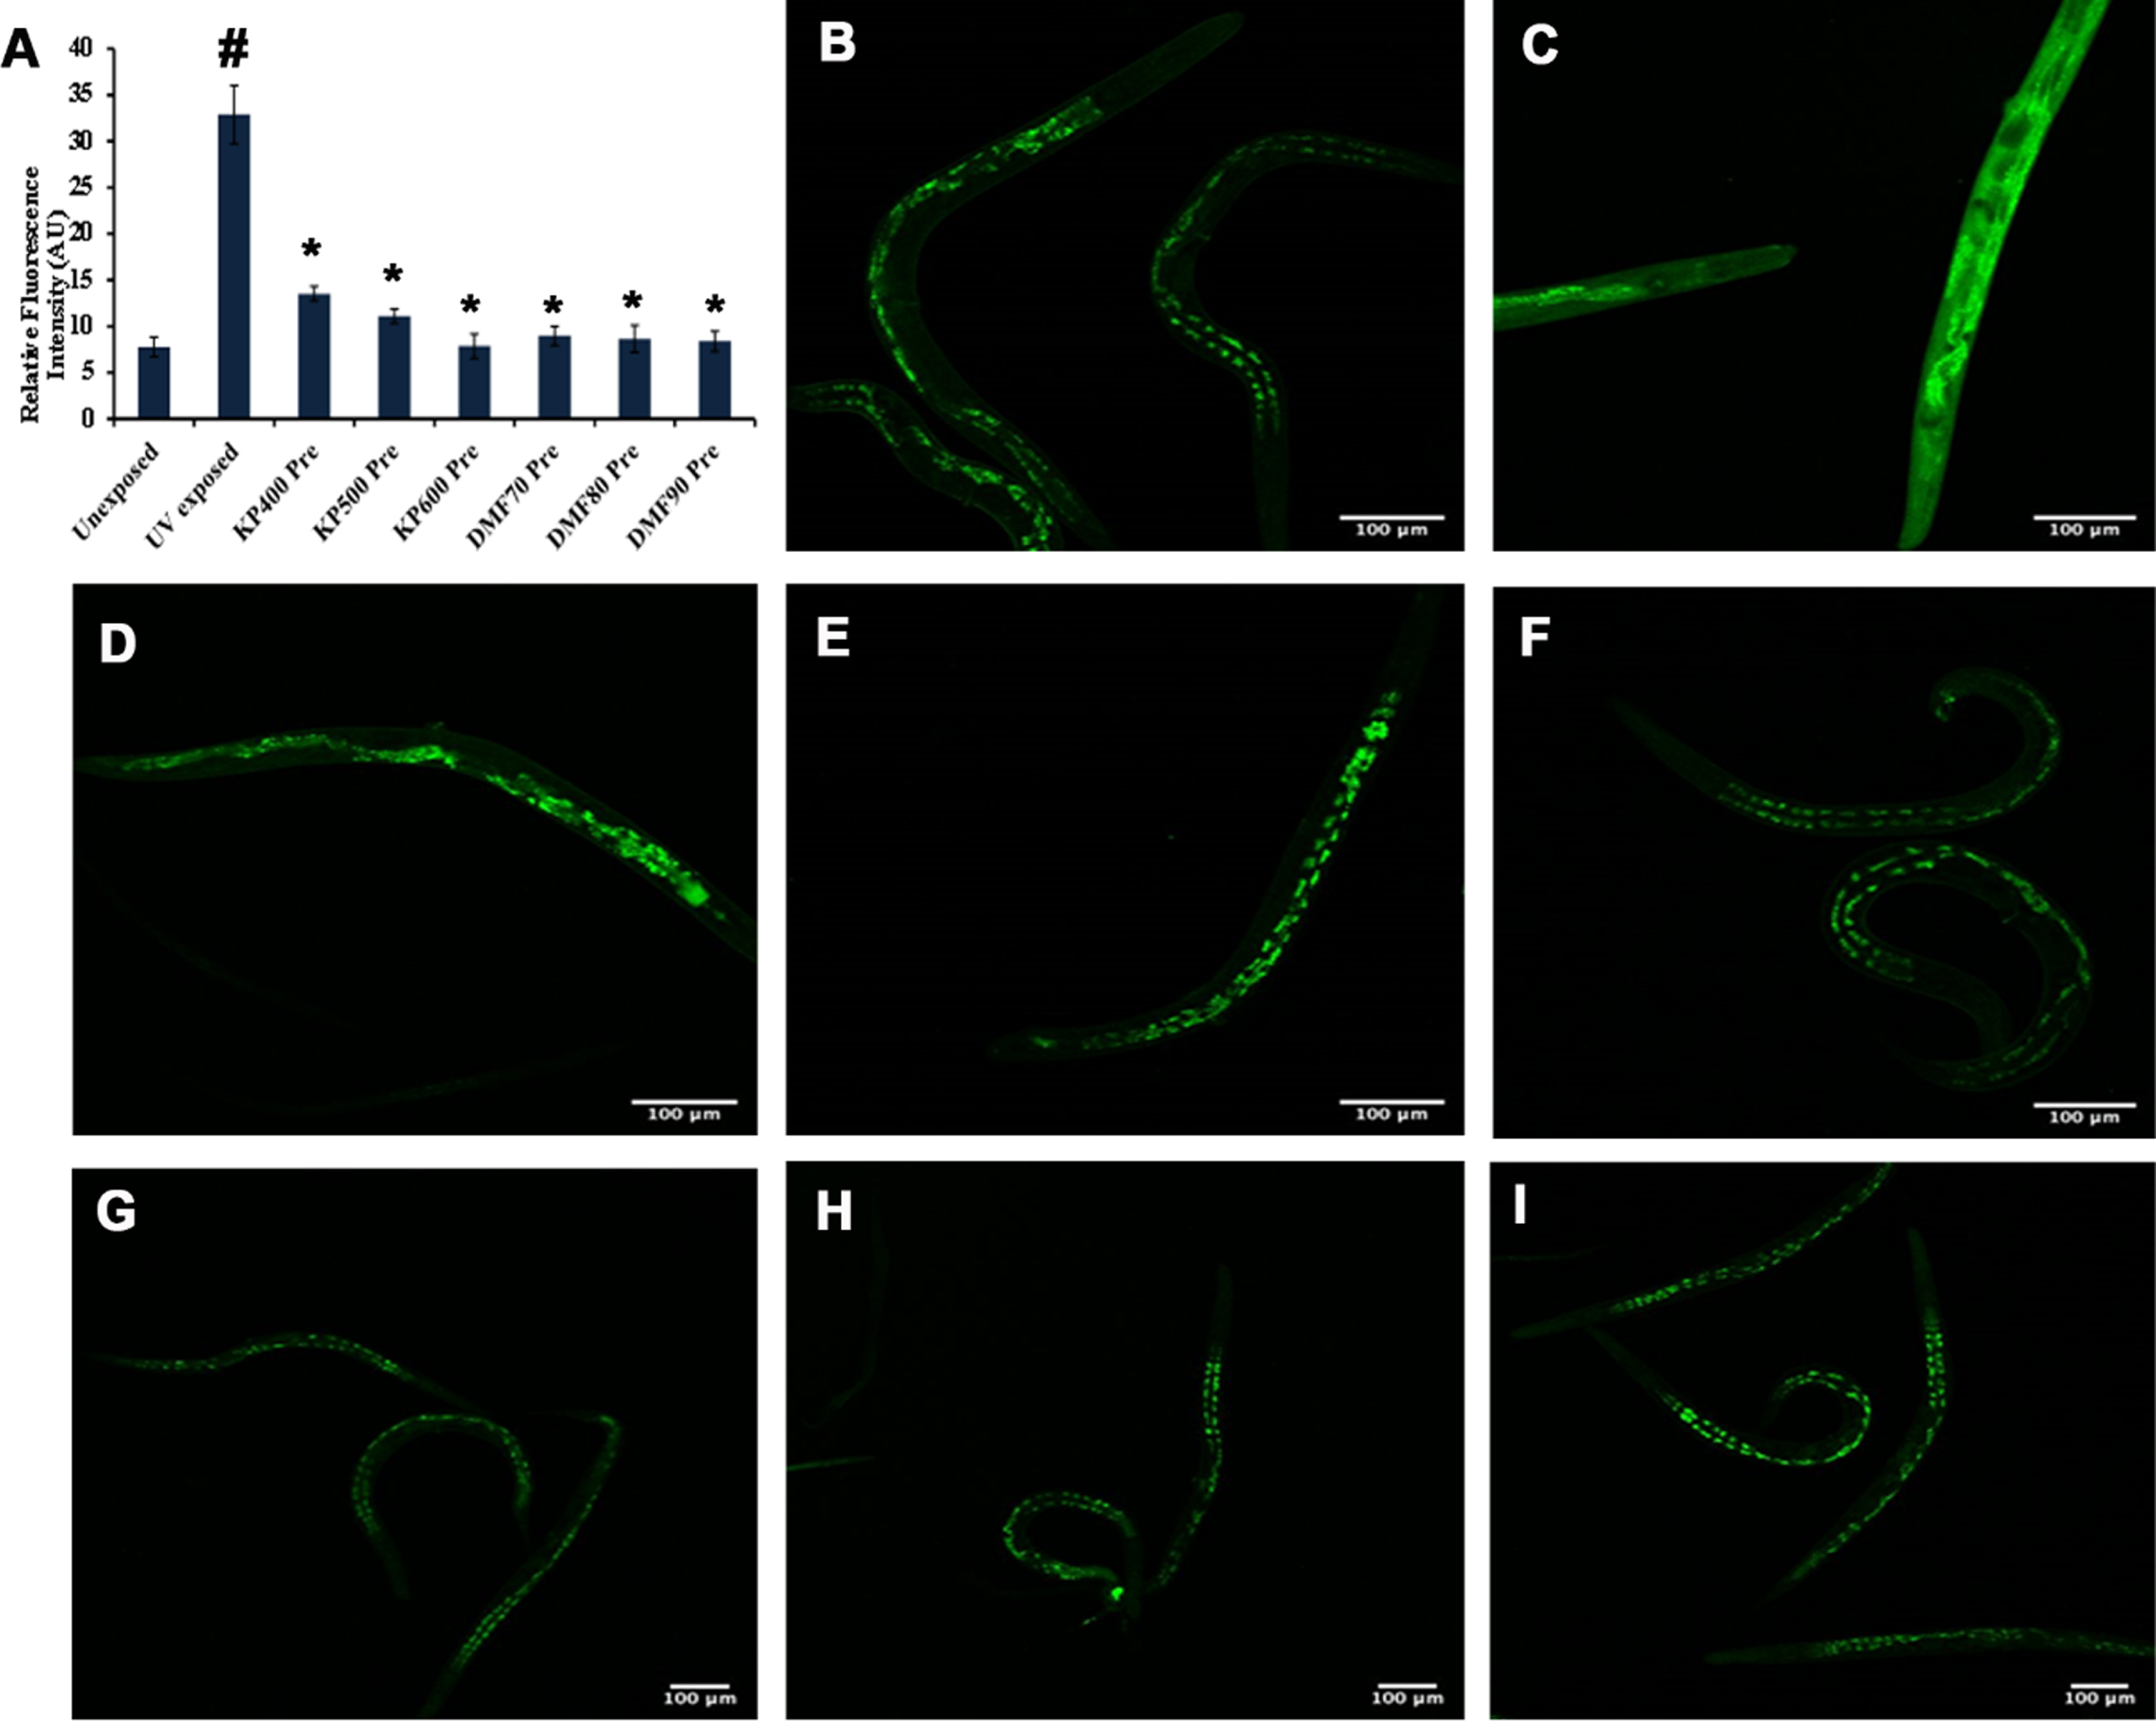 KP and DMF could reduce ROS formation (A) Quantification of ROS fluorescence intensity in N2 worms pre-treated with KP (400 –600μg/ml) and DMF (70 –90μM) (n = 10; significance at p <  0.05 # Control vs UV-A treated; *UV-A treated vs UV-A + KP/DMF treated Representative image of worm showing the level of ROS (B) Un-exposed control (C) UV-A exposed (D –F) KP (400 –600μg/ml) pre-treatment + UV-A exposure (G –I) DMF (70 –90μM) pre-treatment + UV-A exposure.